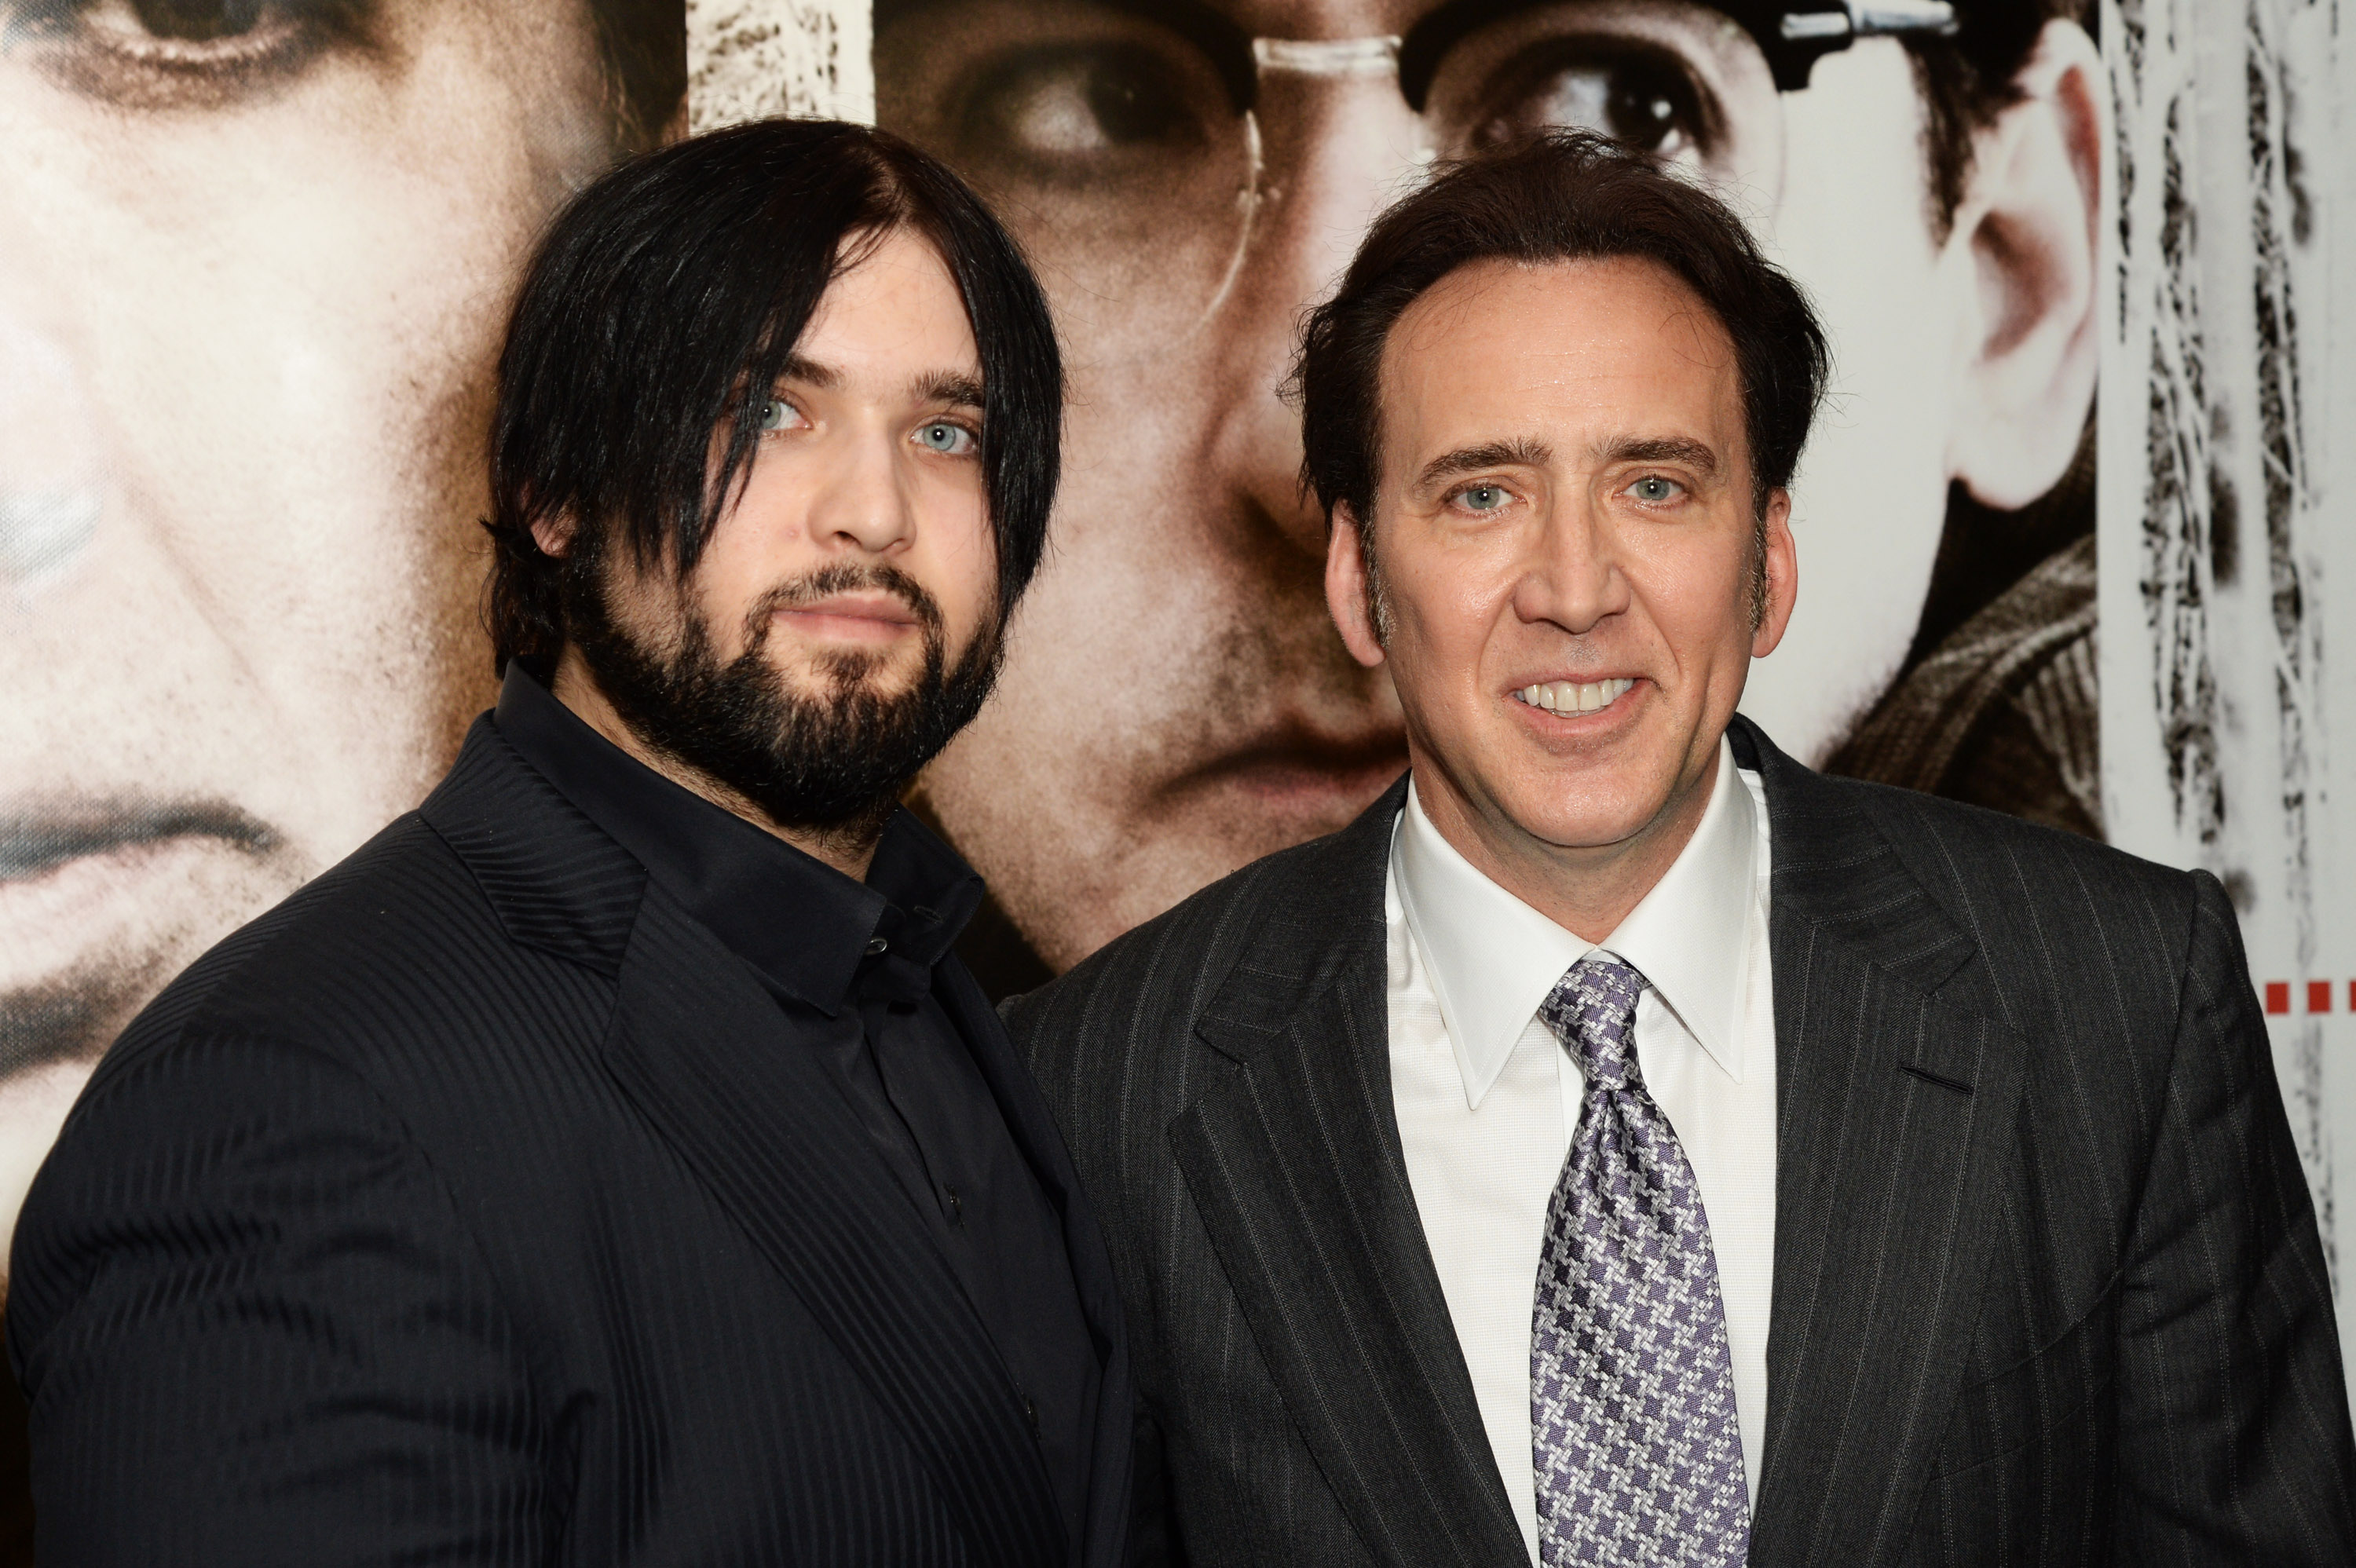 Weston Cage and Nicolas Cage attend the UK premiere of "The Frozen Ground" in London, England, on July 17, 2013. | Source: Getty Images